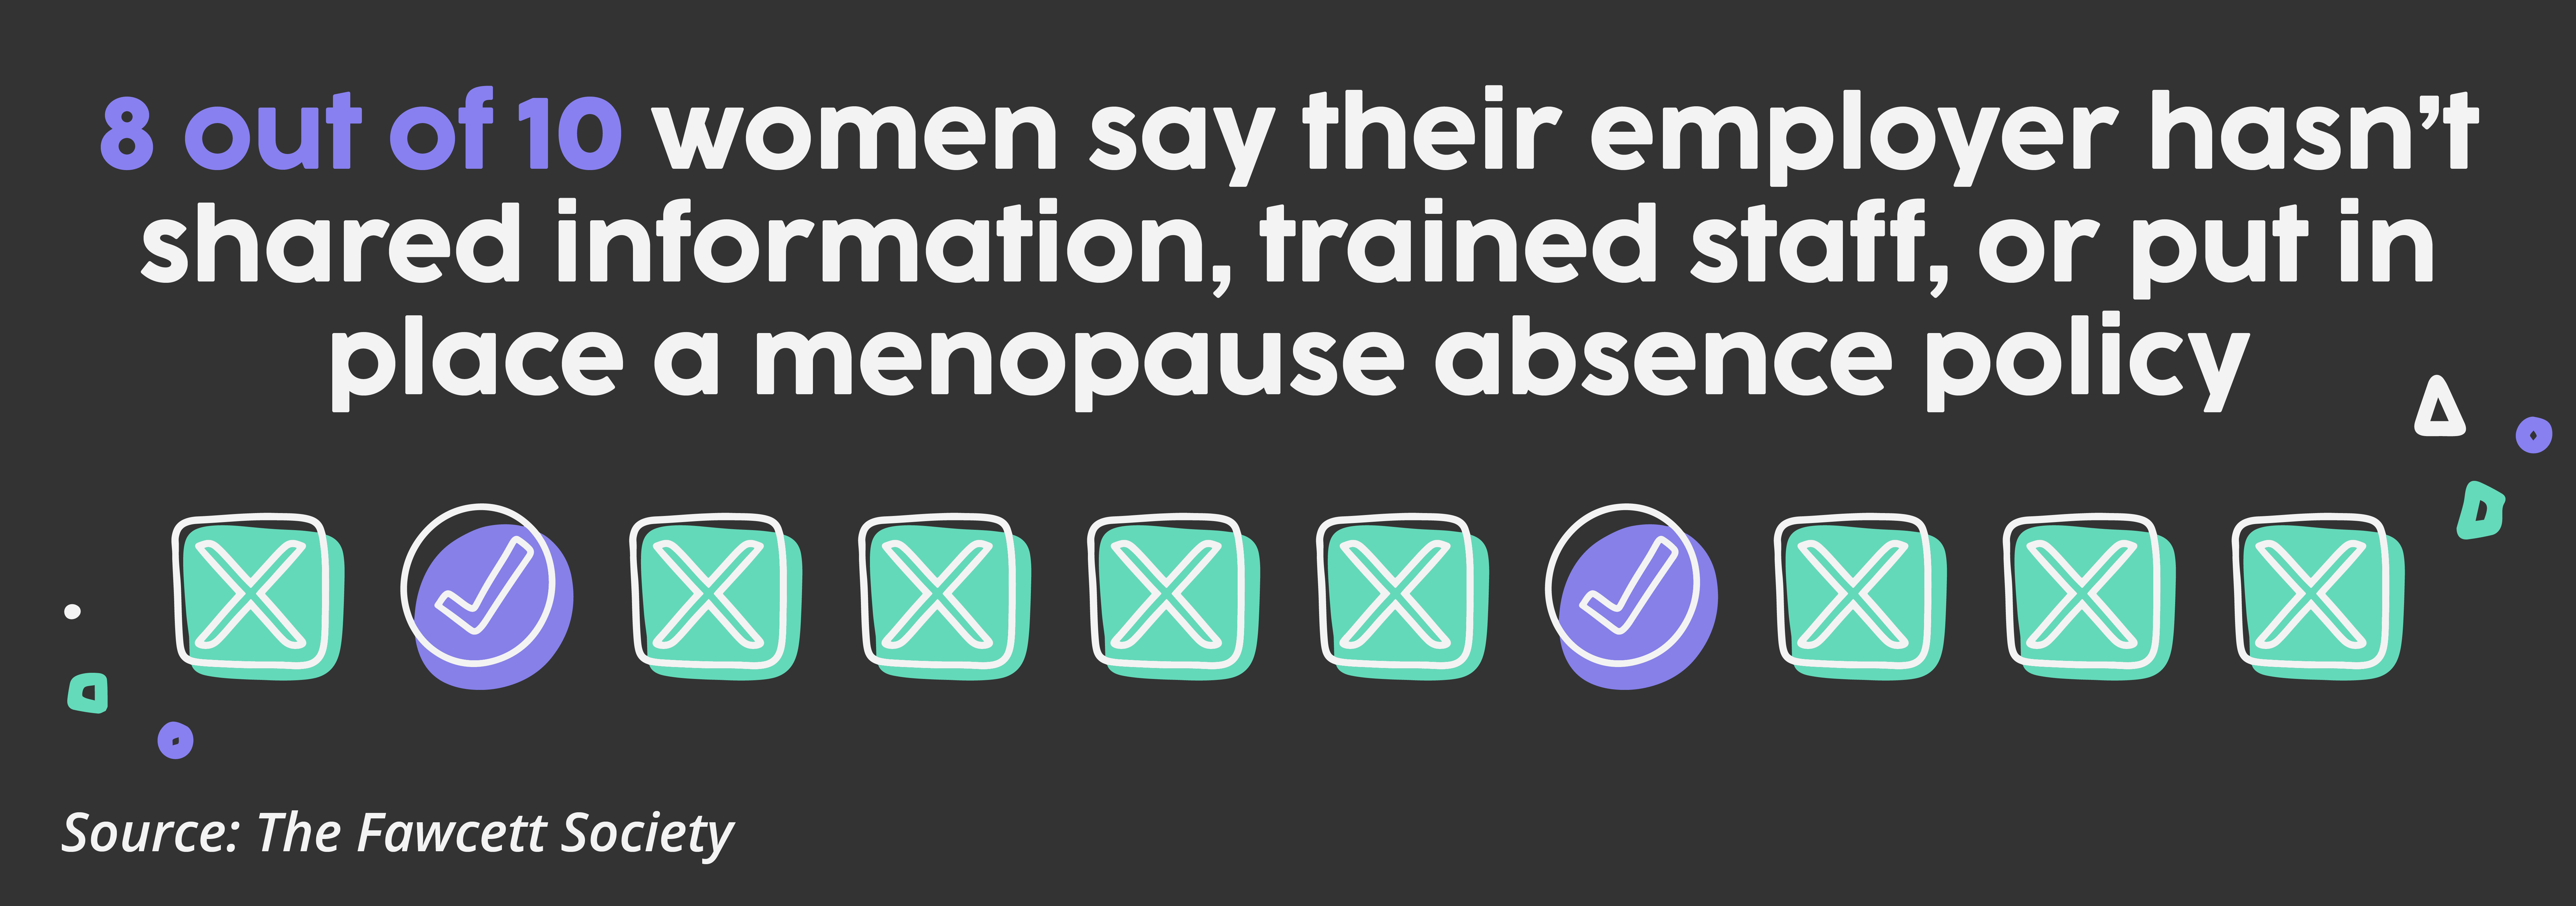 8 out of 10 women say their employer hasn’t shared information, trained staff, or put in place a menopause absence policy. Source: The Fawcett Society